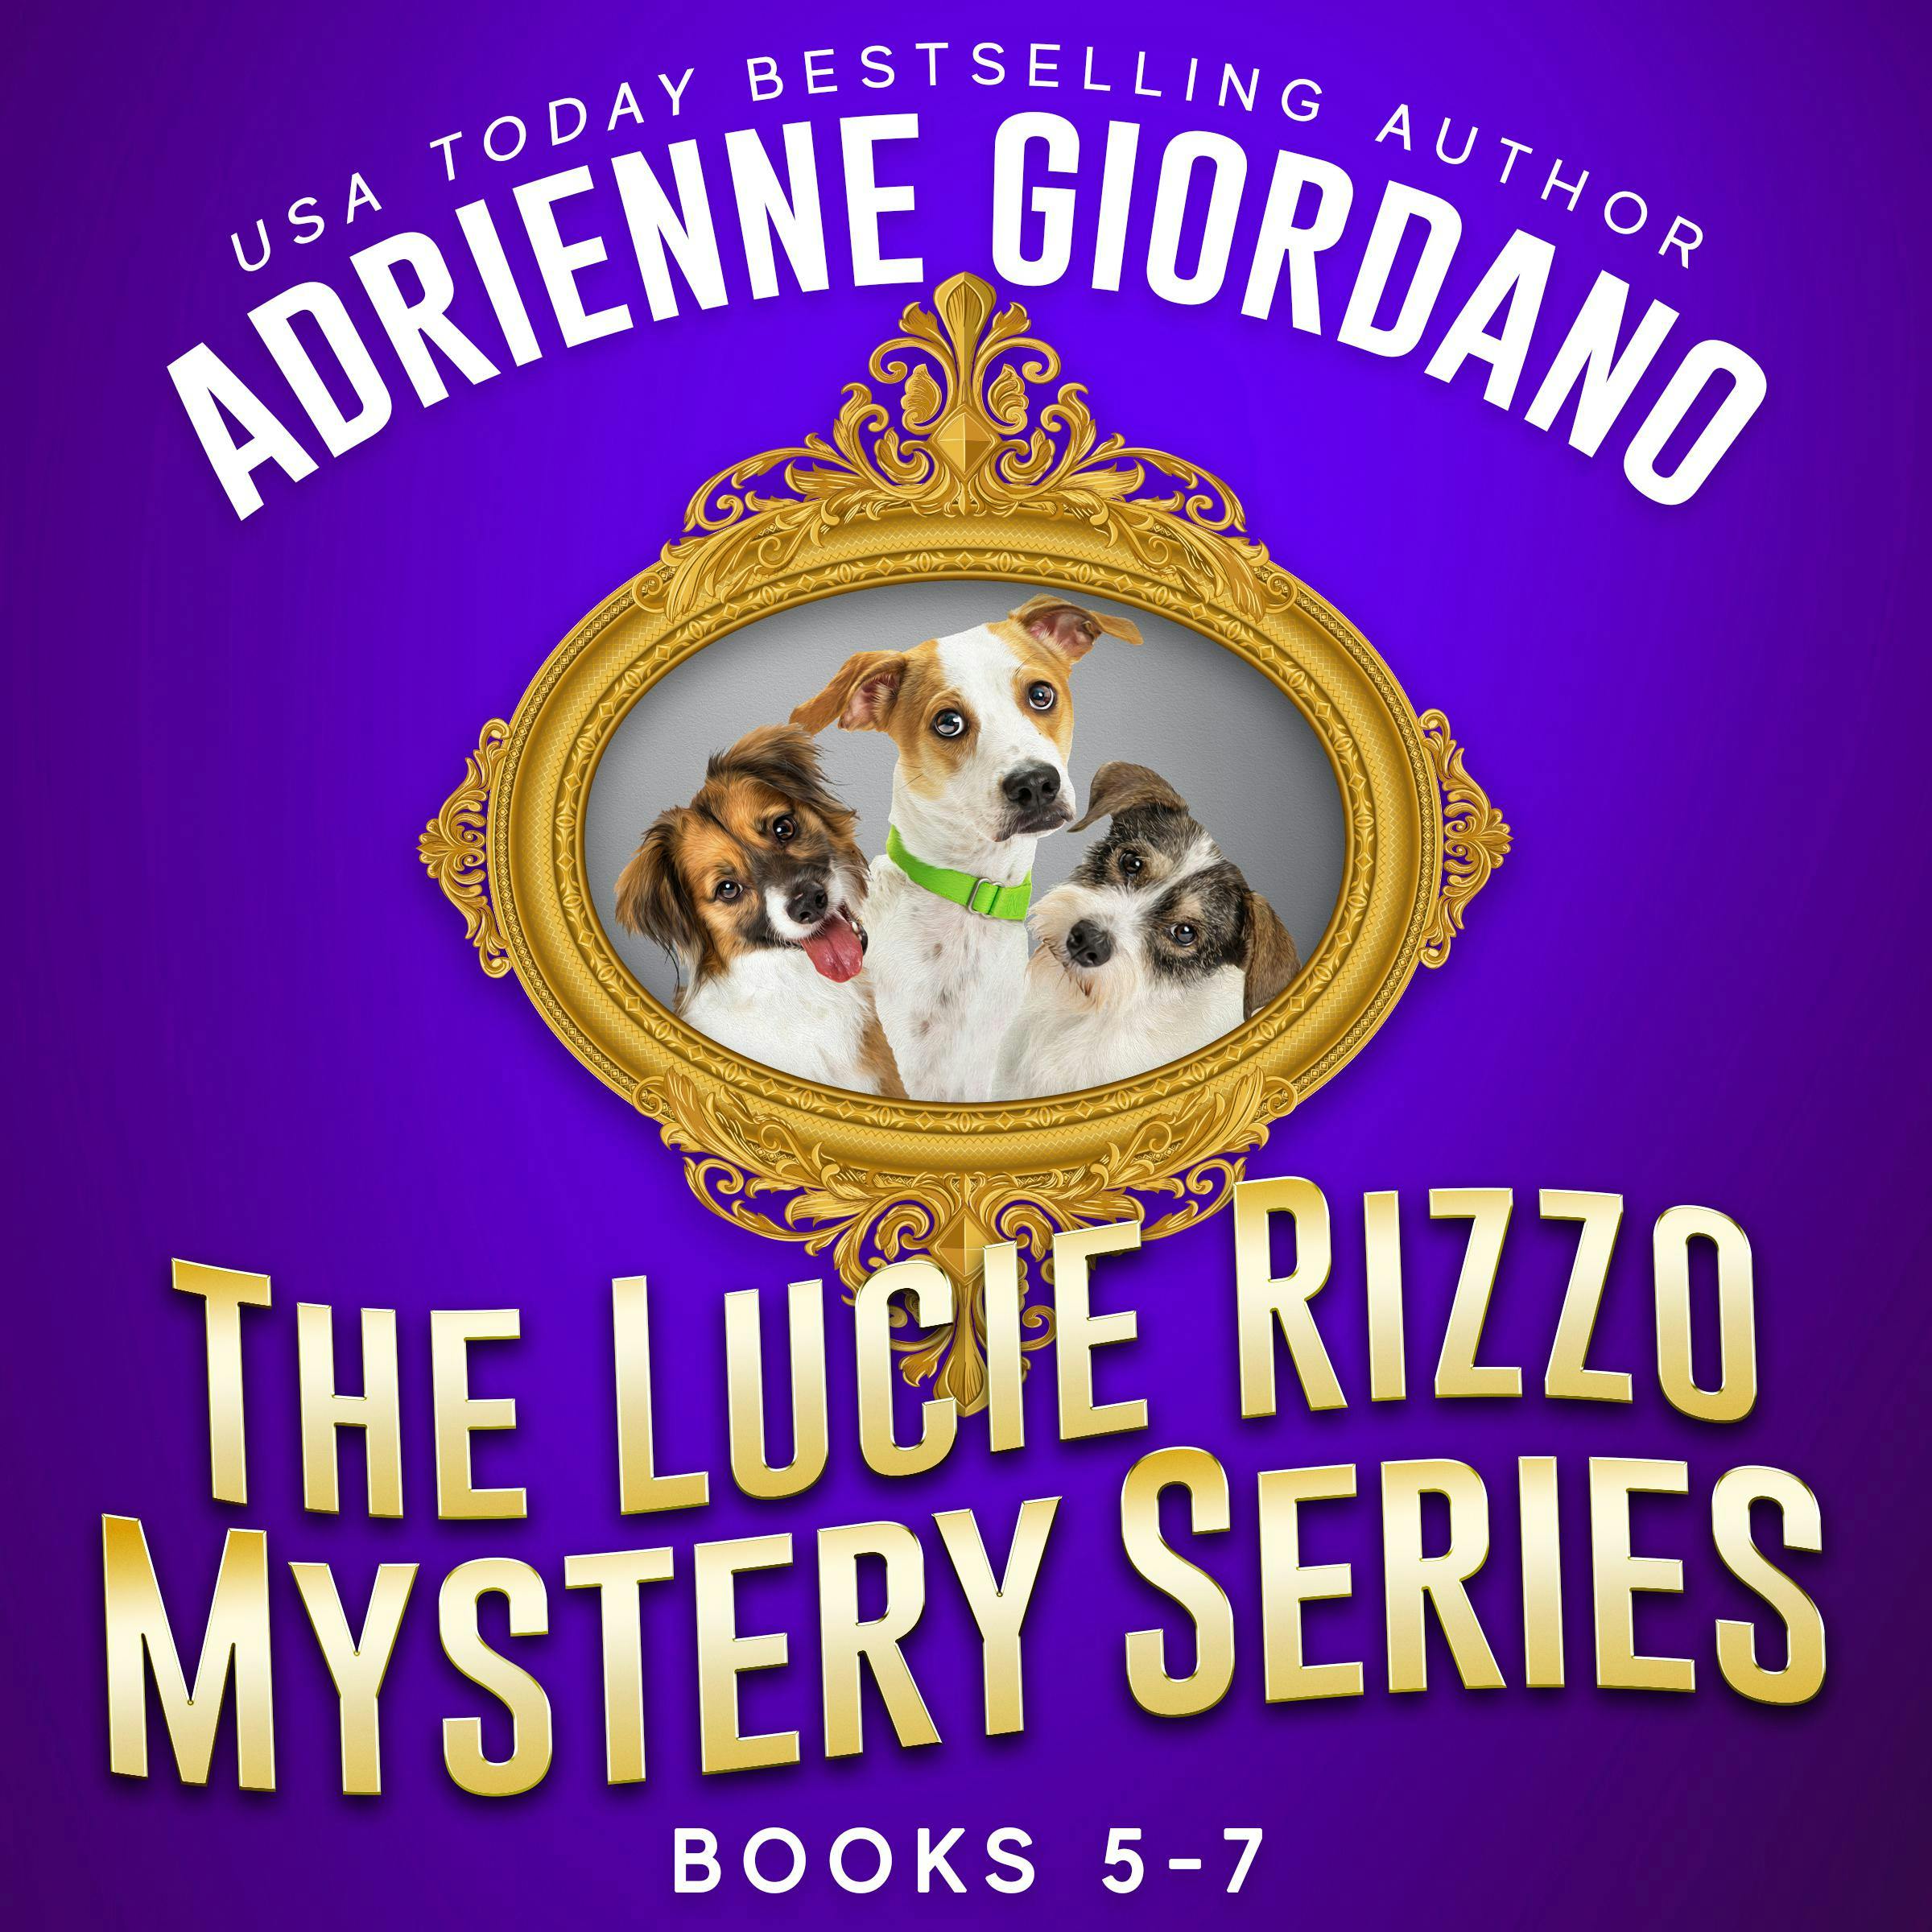 Lucie Rizzo Mystery Series Box Set 2: A Humorous Amateur Sleuth Mystery Series - Adrienne Giordano